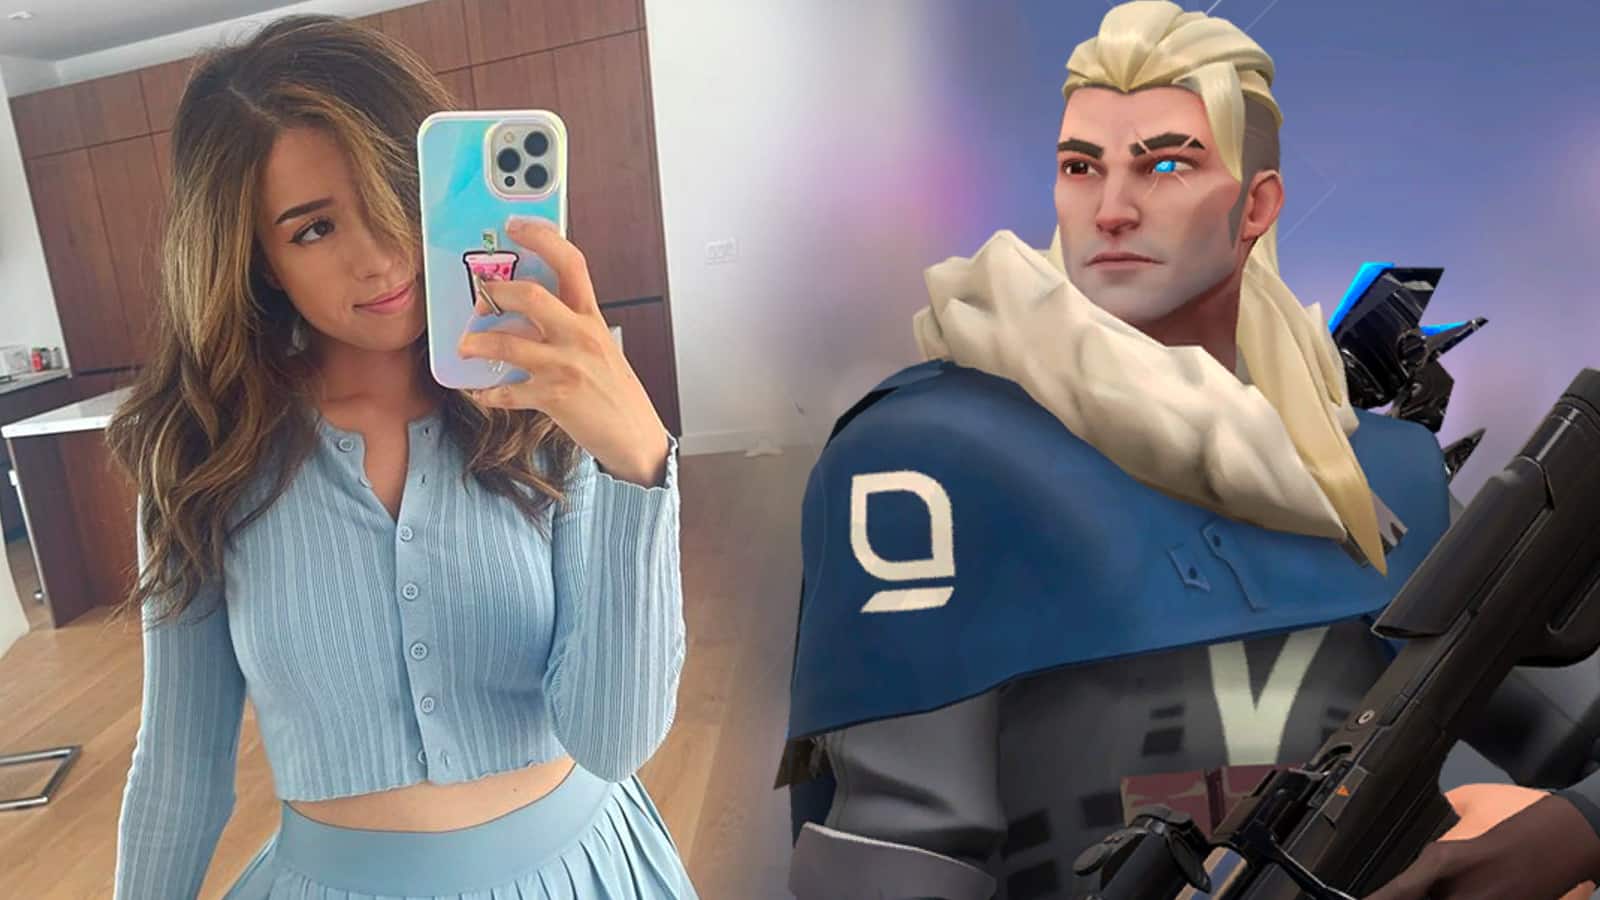 Pokimane opens up on Valorant ranked issues: “People get weird about me being a girl”